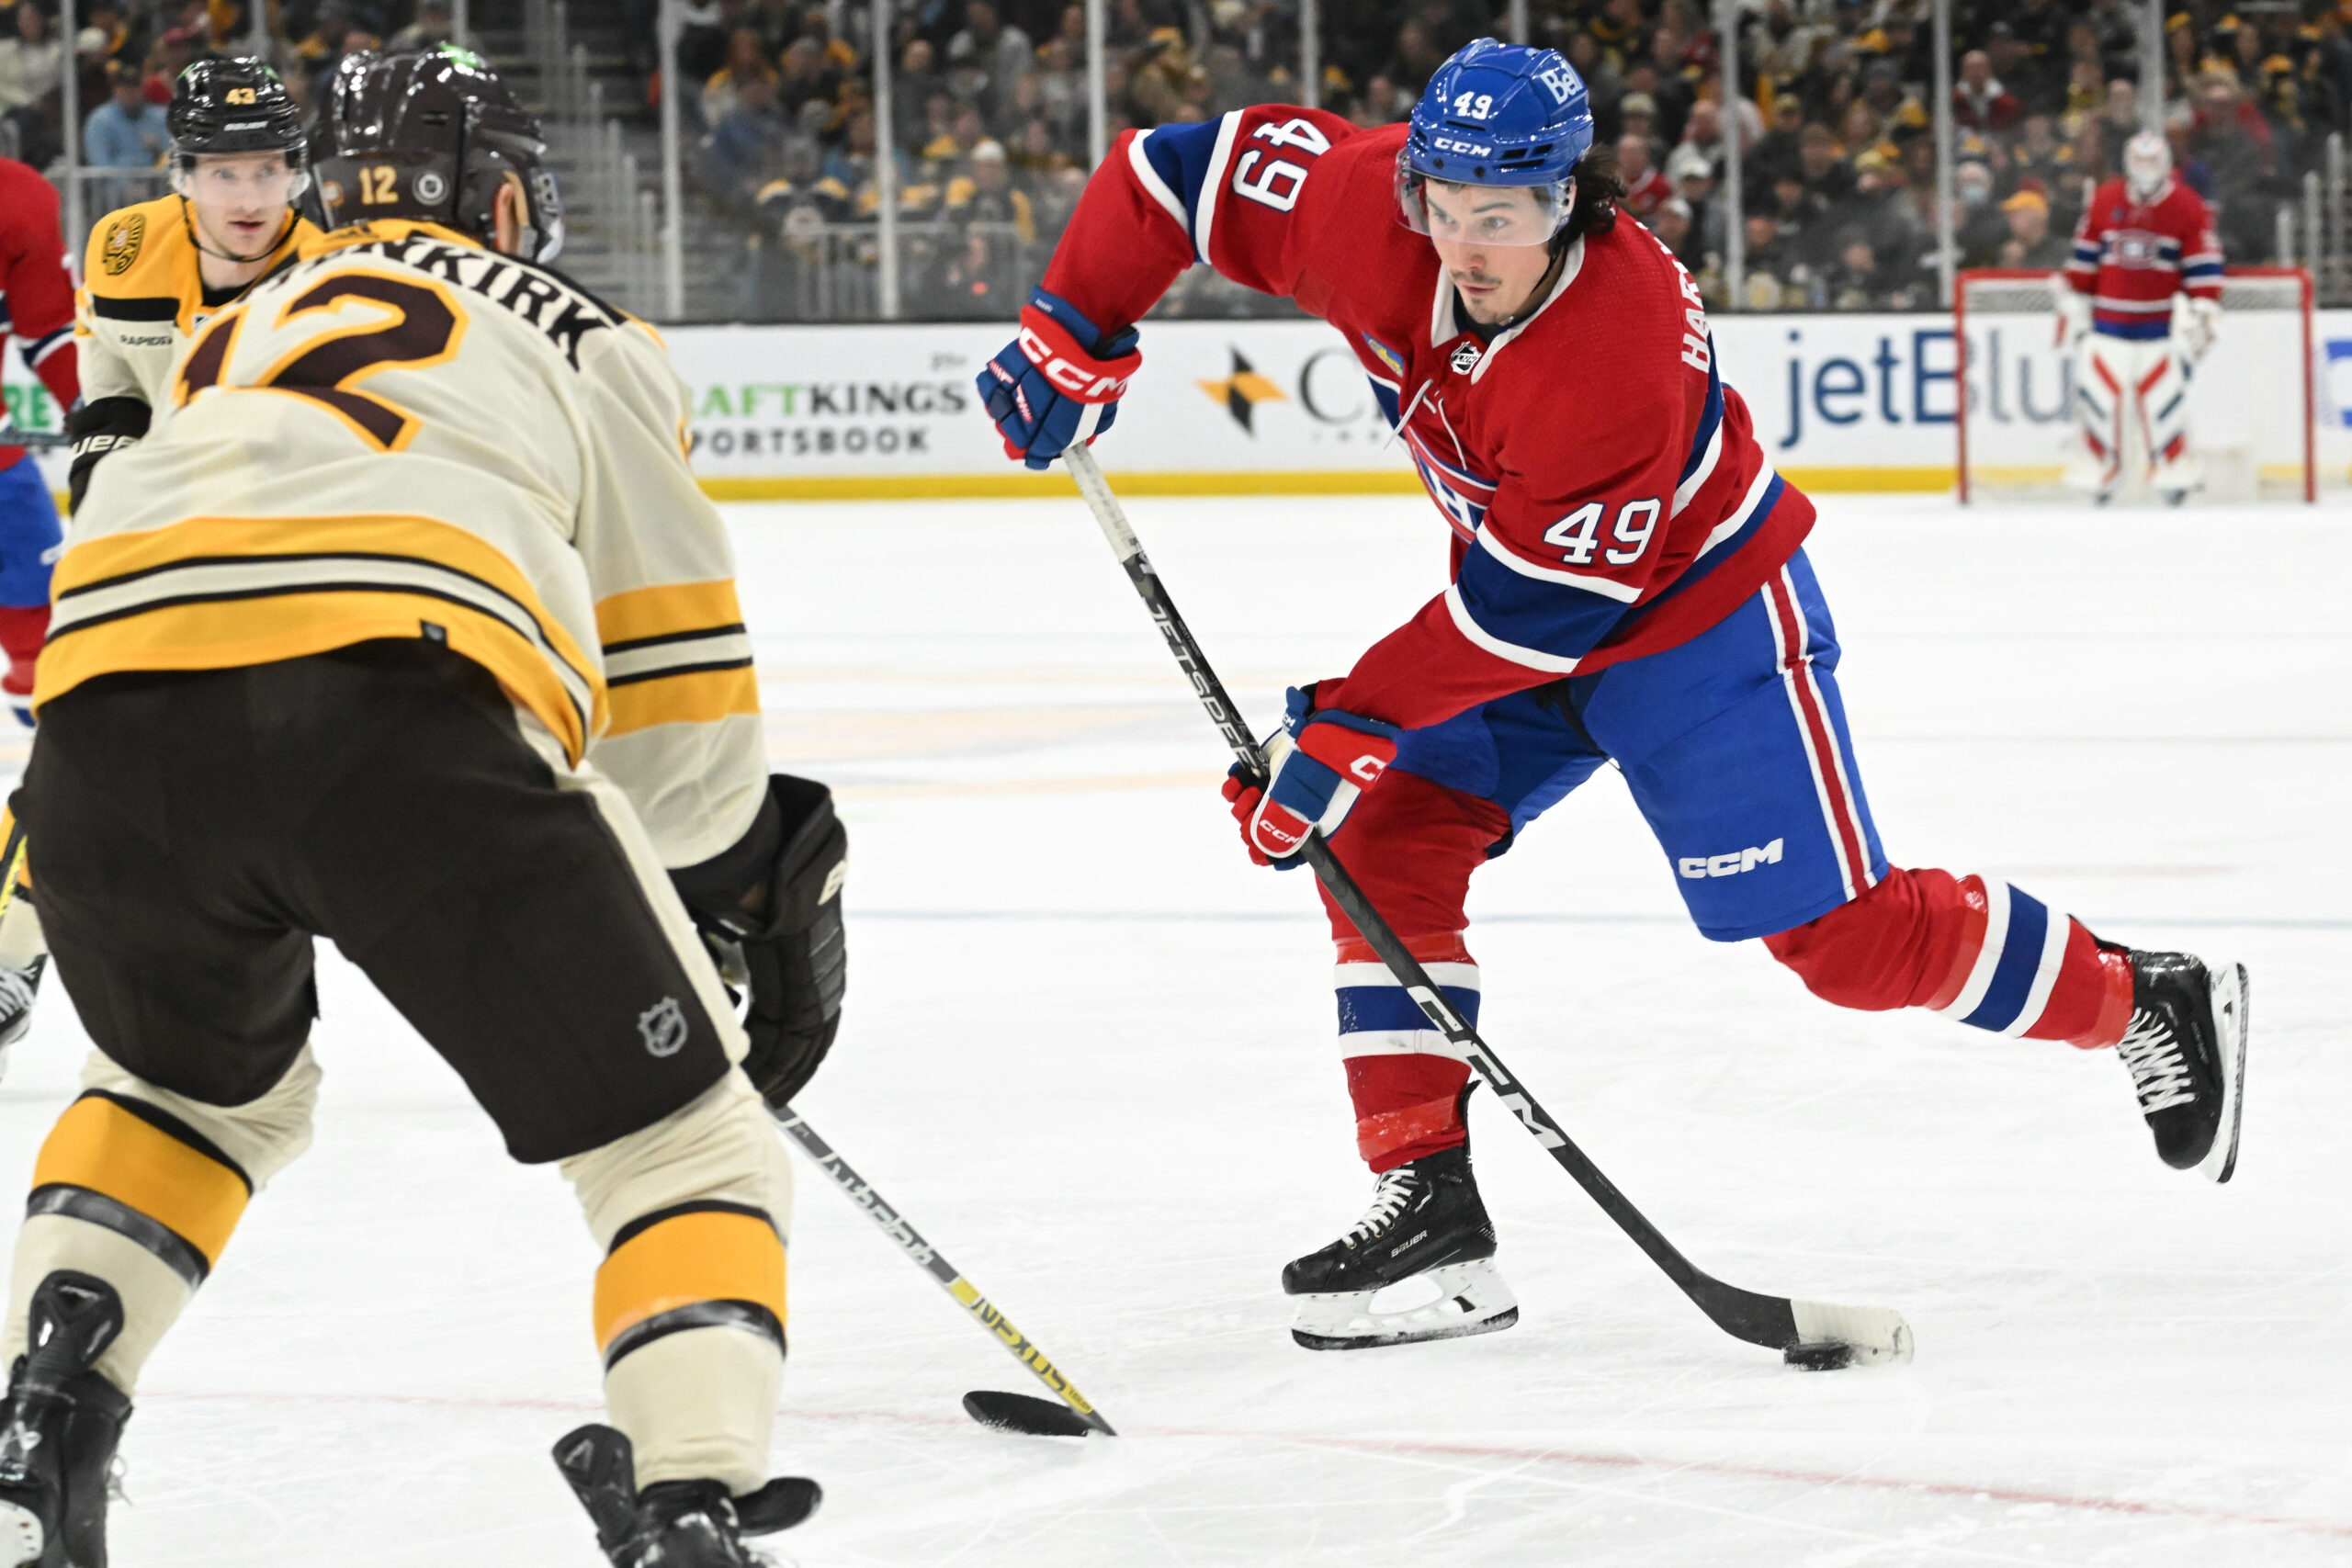 Harvey-Pinard's Future with Montreal Canadiens